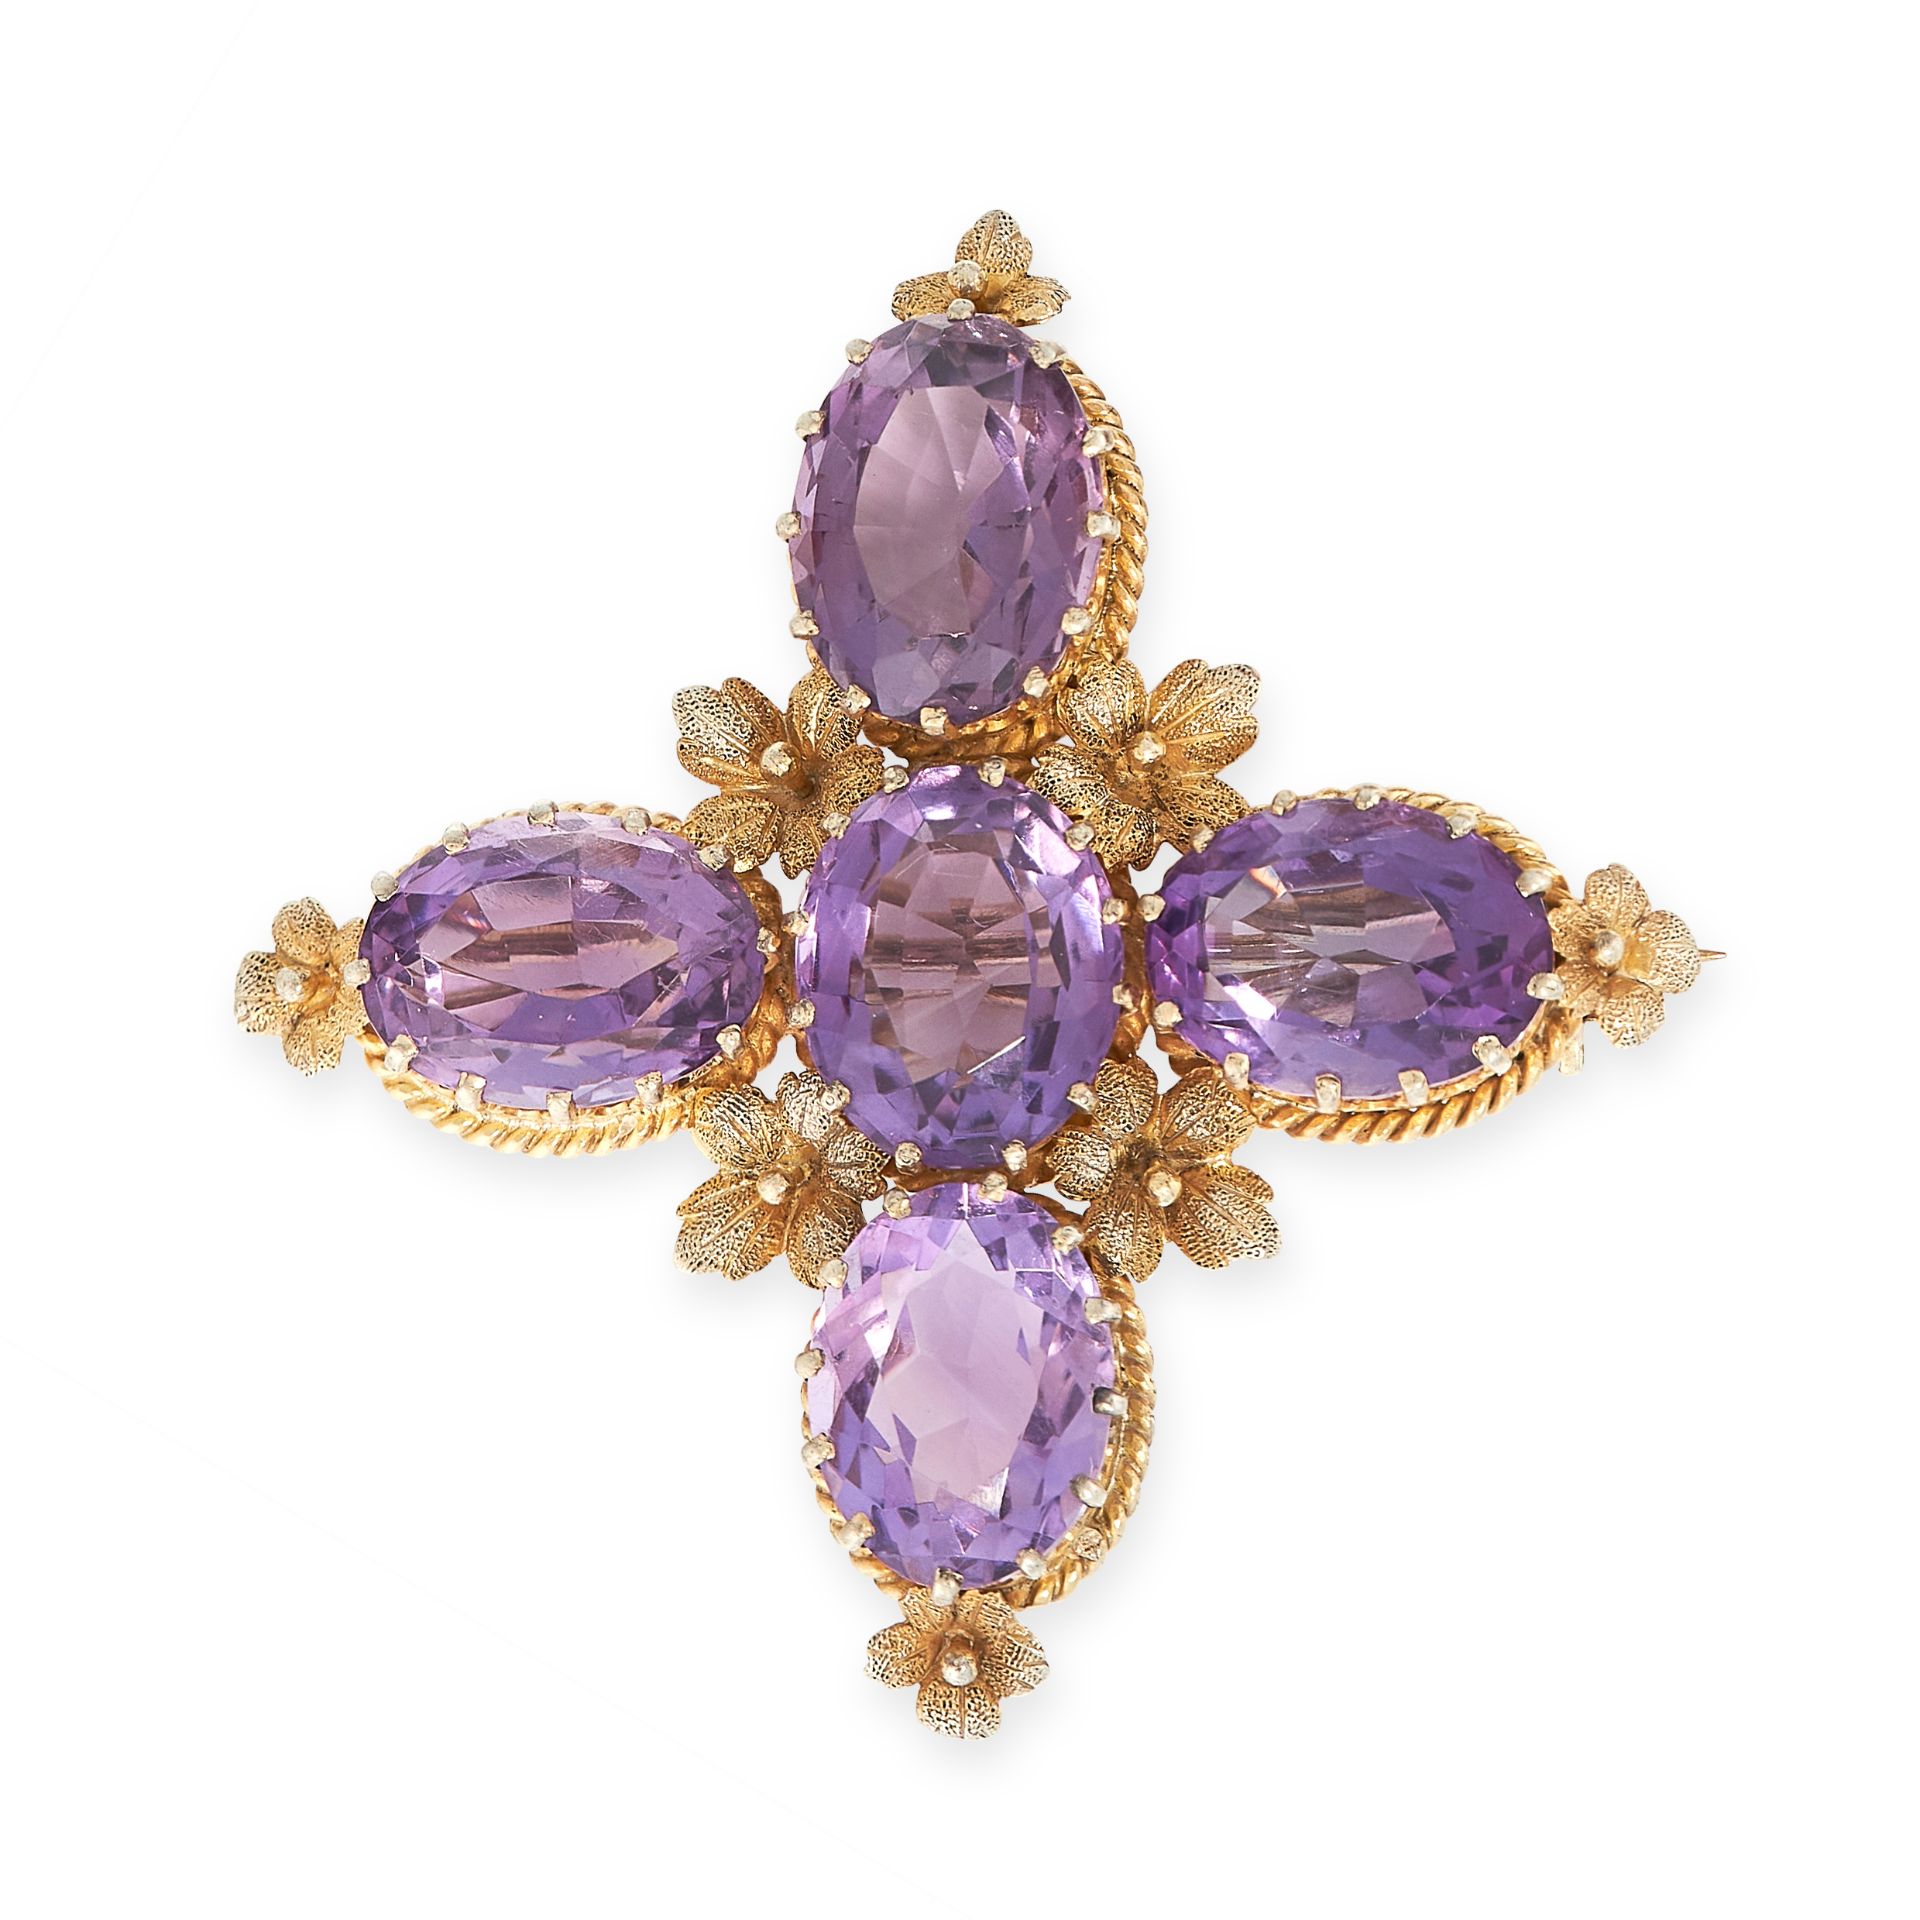 A GILT AMETHYST CROSS BROOCH in silver and yellow gold, the body set with five oval cut amethyst